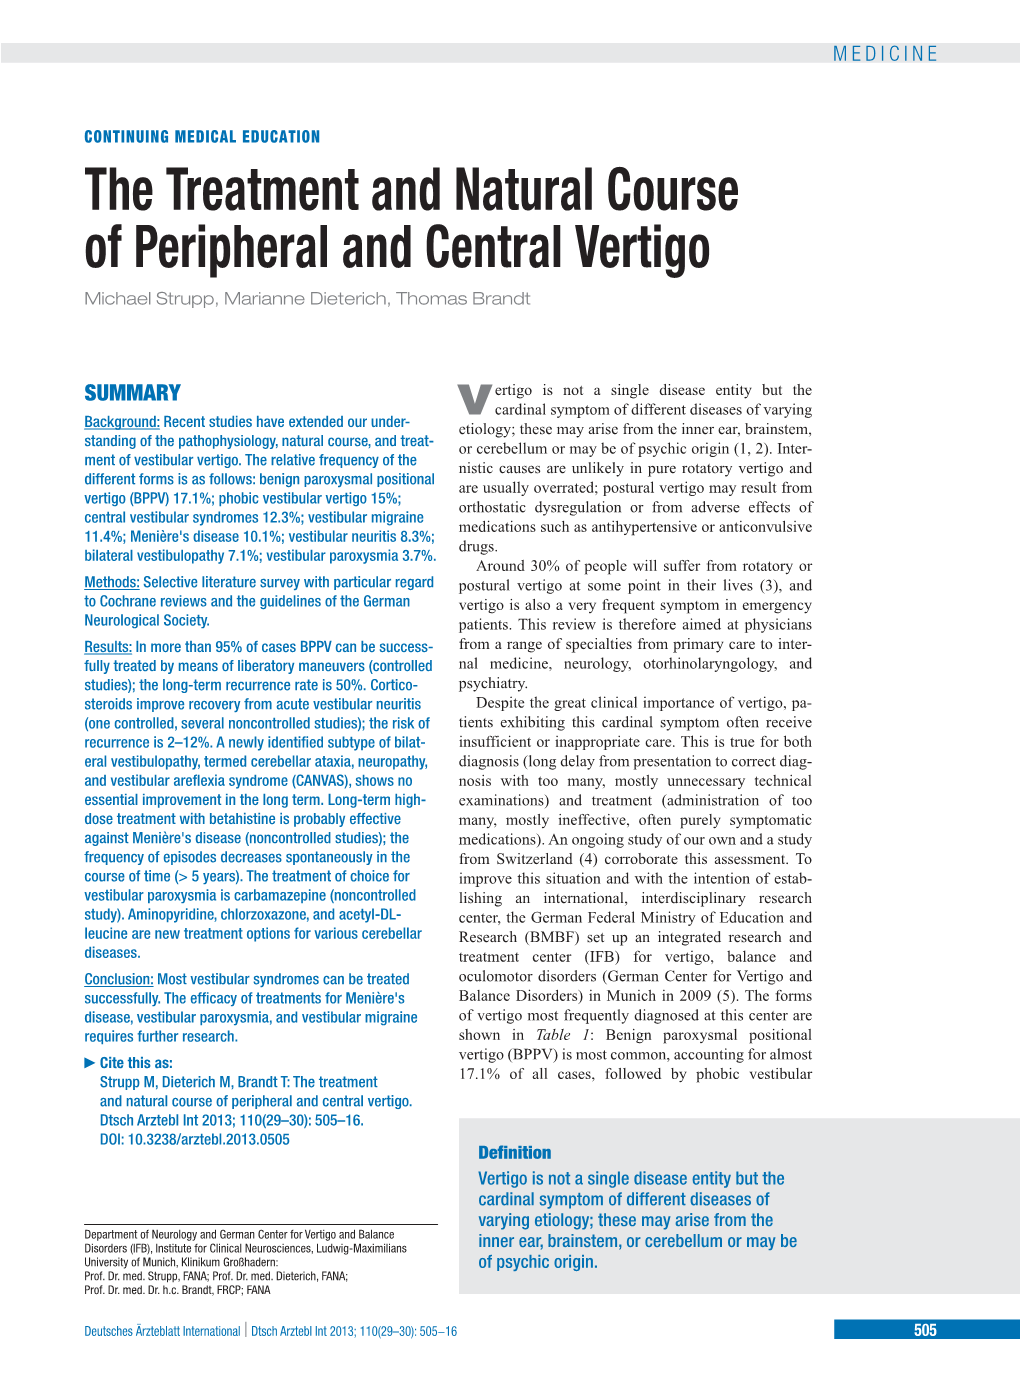 The Treatment and Natural Course of Peripheral and Central Vertigo Michael Strupp, Marianne Dieterich, Thomas Brandt